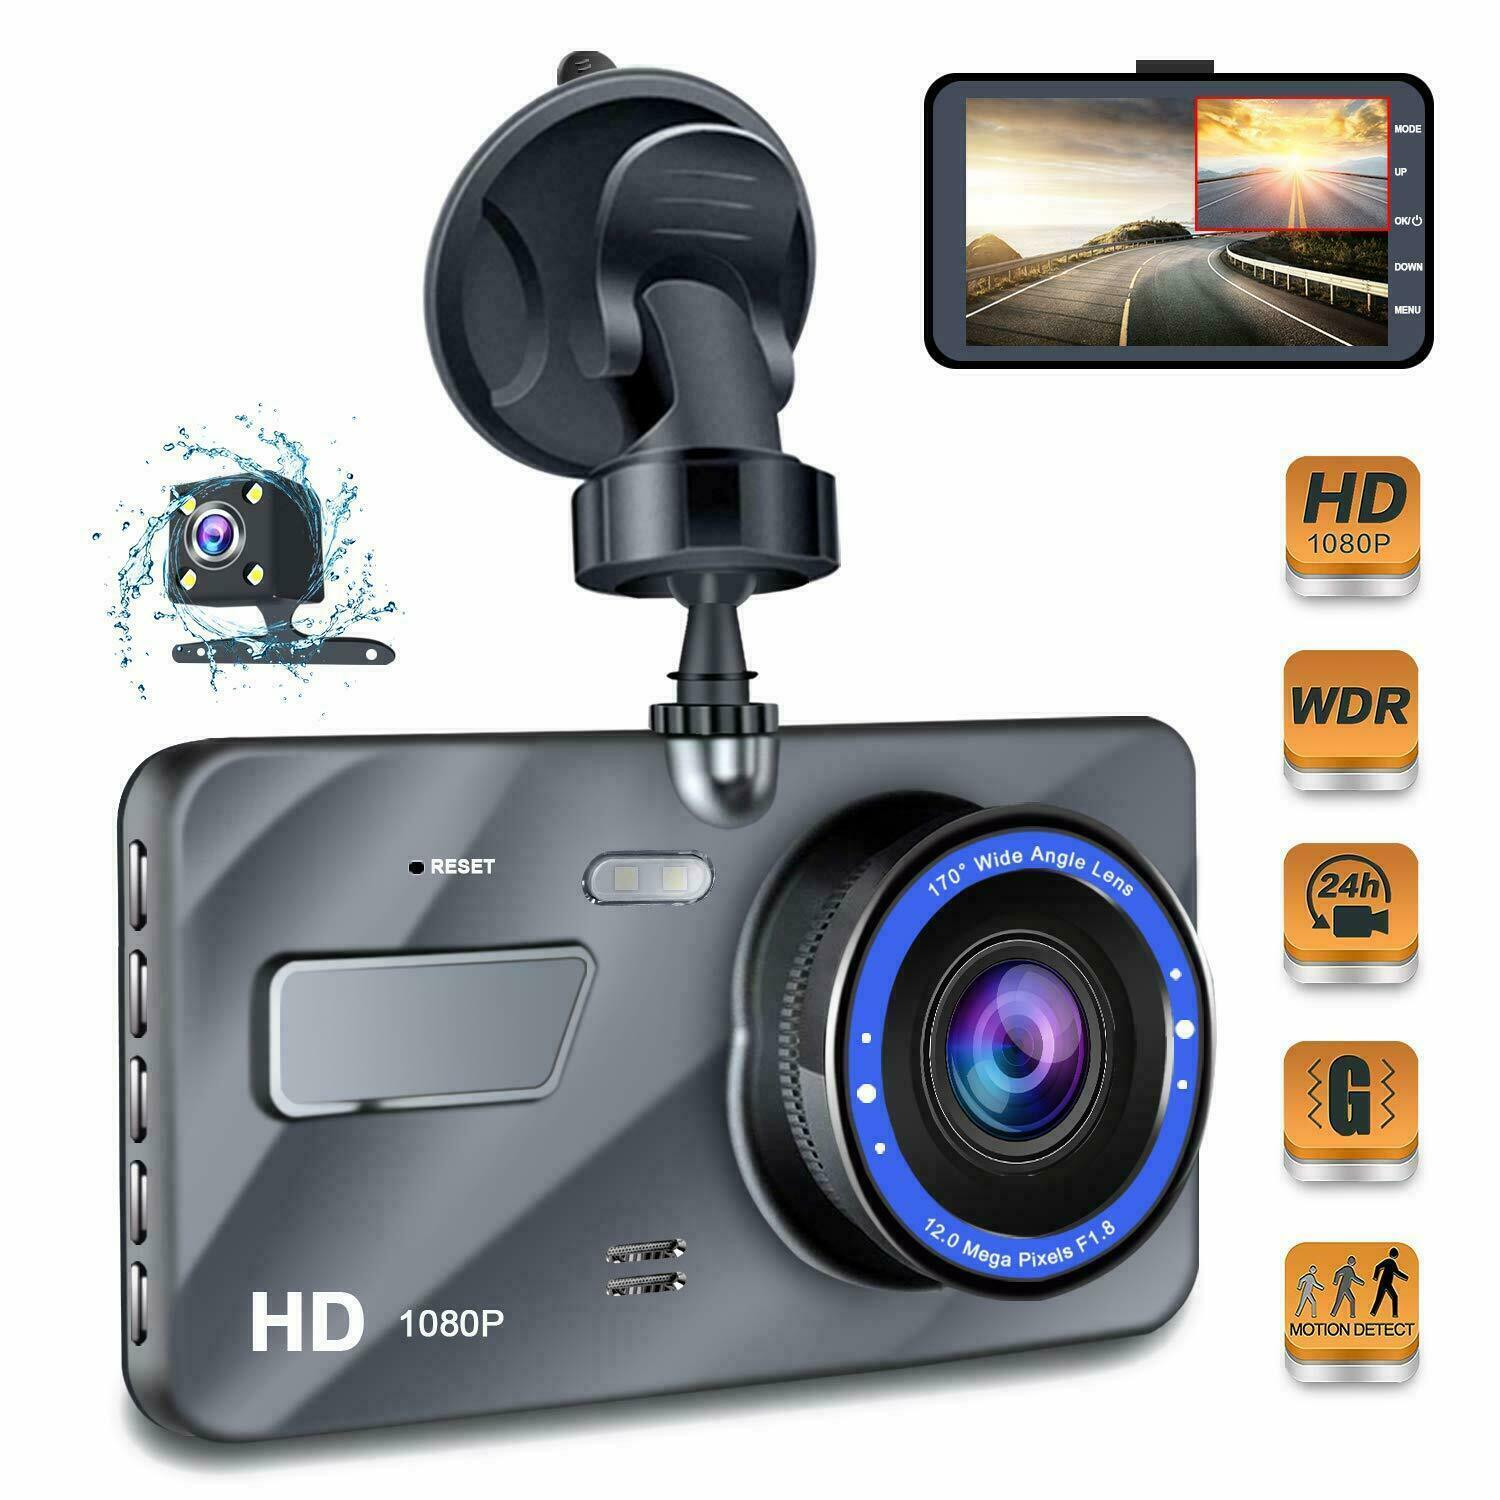 https://icarscars.com/cdn/shop/products/Full-HD-1080P-4-IPS-Car-DVR-Vehicle-Dashboard-Camera-with-Infrared-Night-Vision-Video-Recorder.jpg?v=1609749015